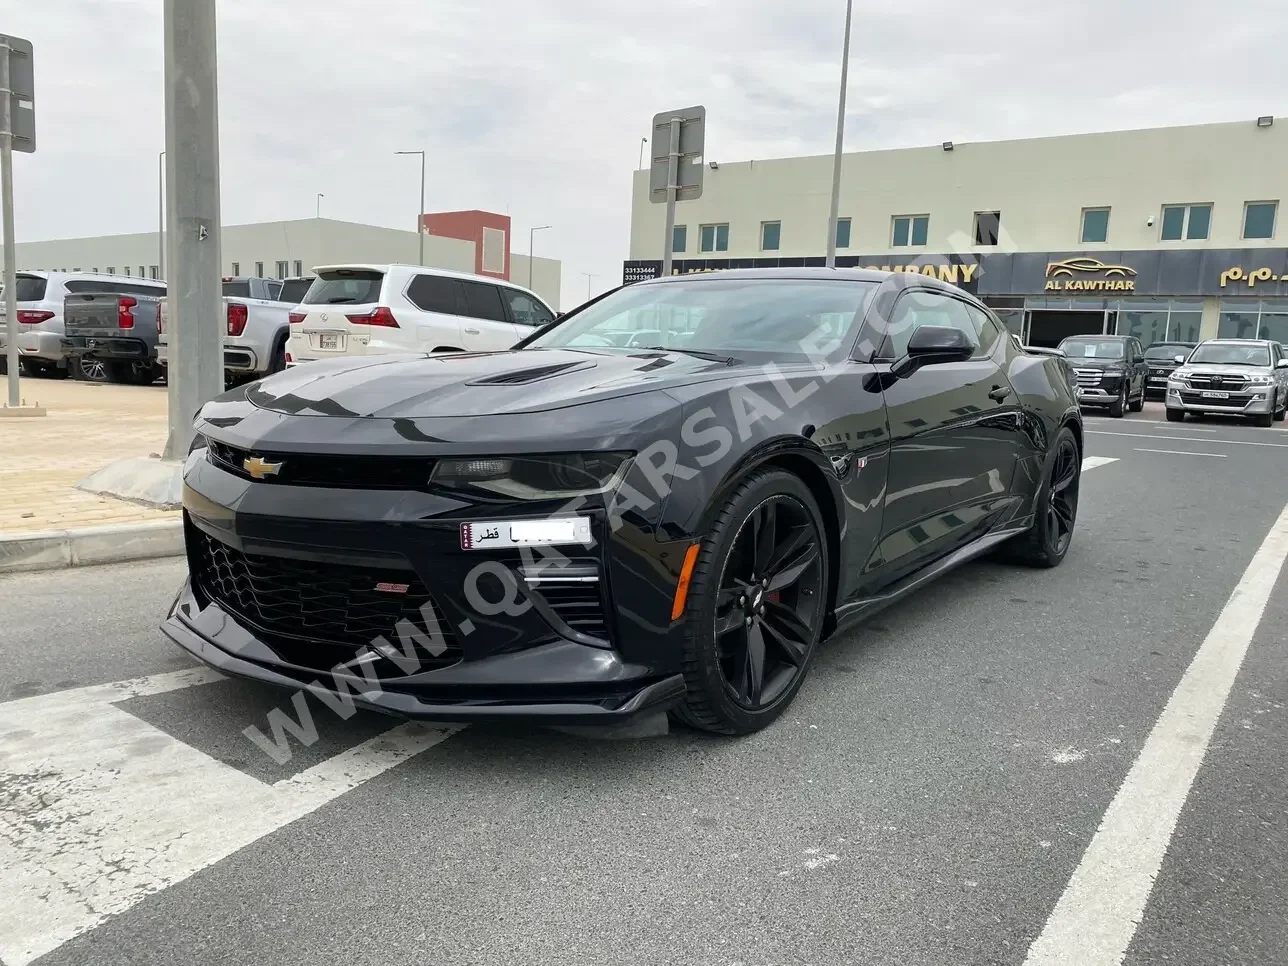  Chevrolet  Camaro  SS  2017  Automatic  73,000 Km  8 Cylinder  Rear Wheel Drive (RWD)  Coupe / Sport  Black  With Warranty